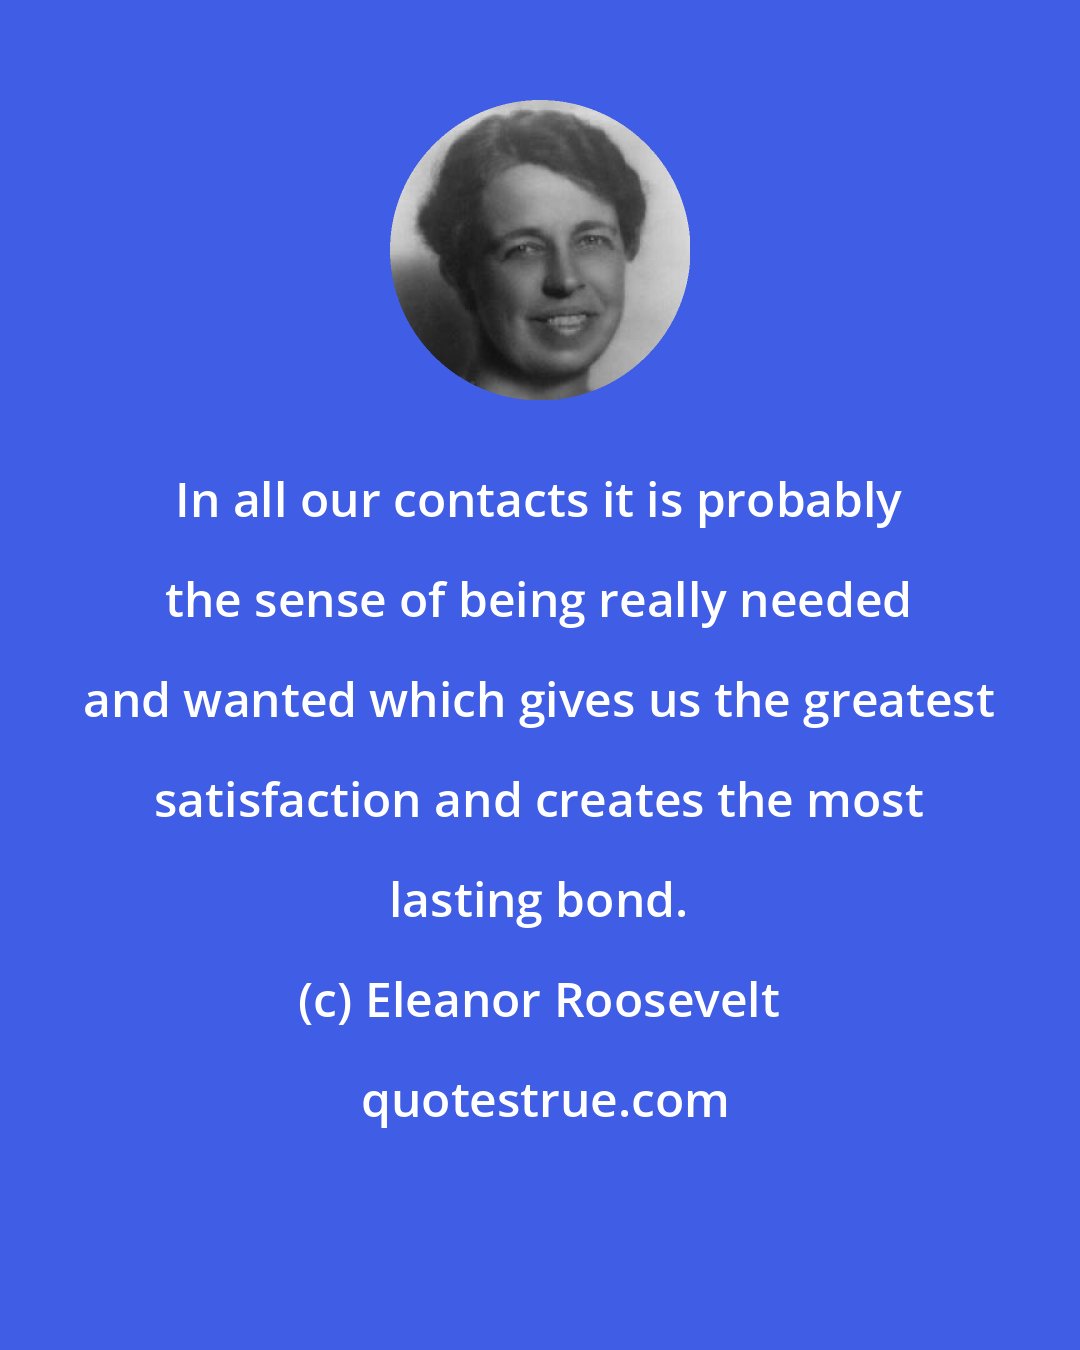 Eleanor Roosevelt: In all our contacts it is probably the sense of being really needed and wanted which gives us the greatest satisfaction and creates the most lasting bond.